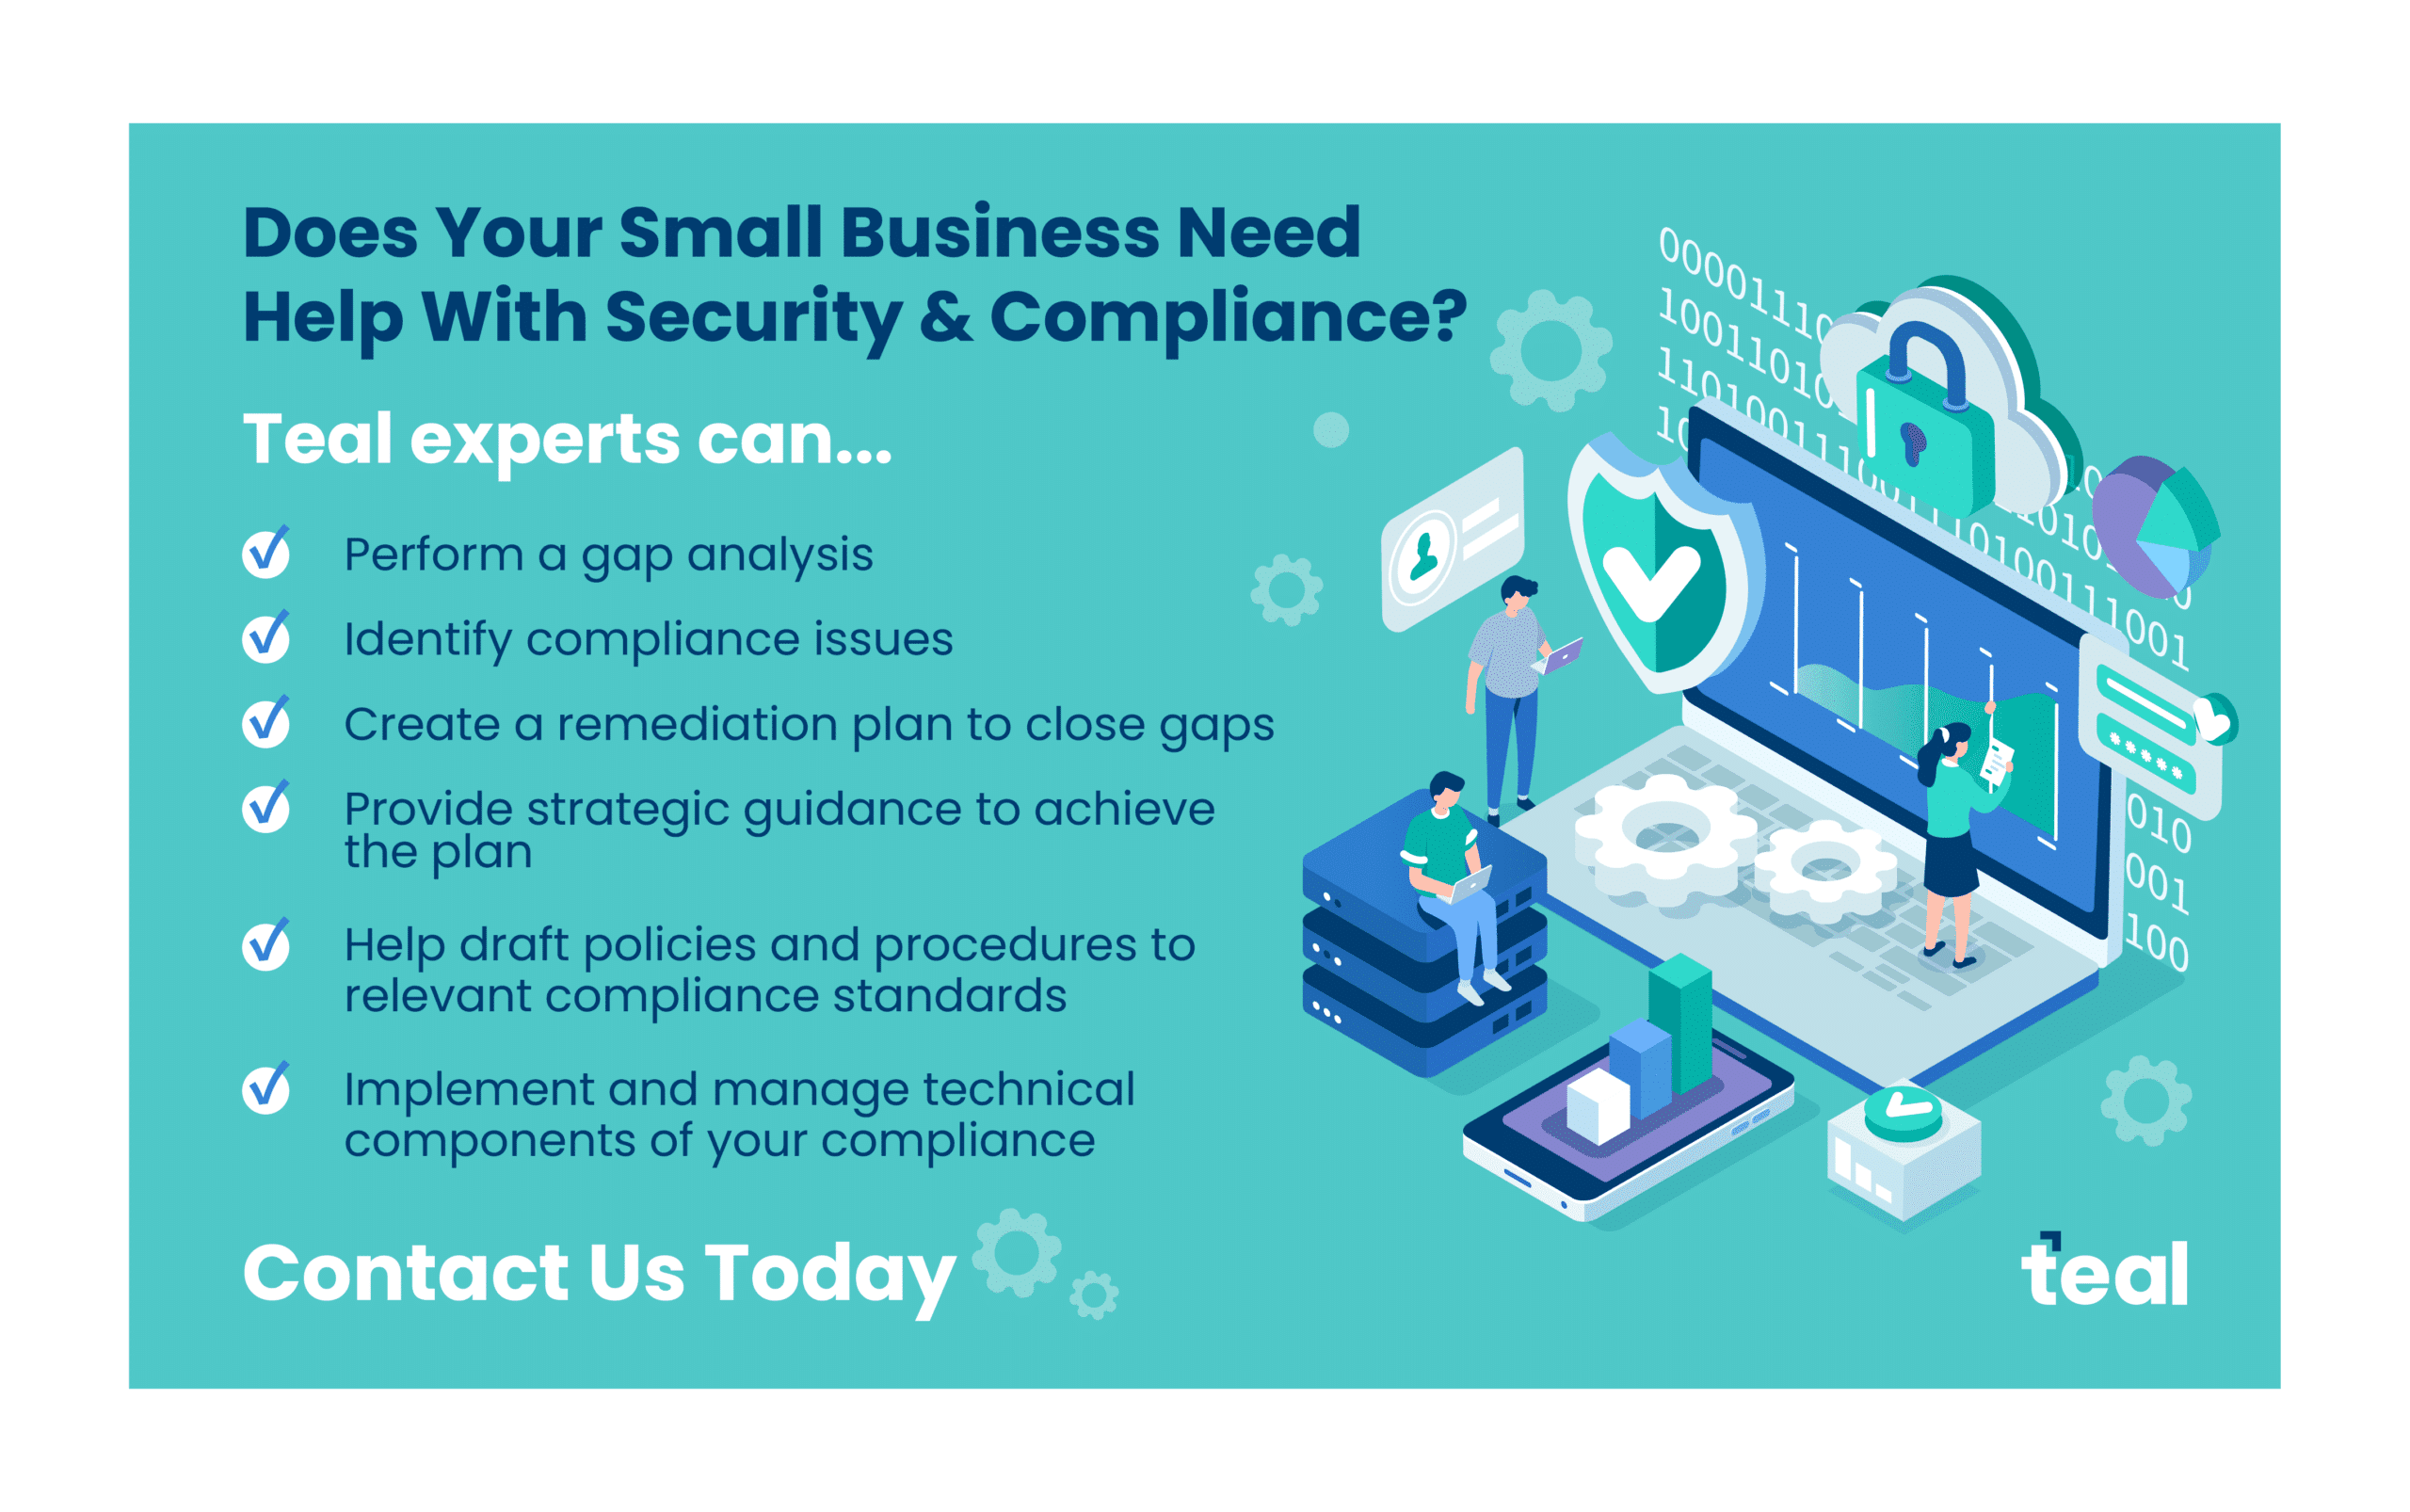 Image explains six compliance benefits businesses get with a healthcare gap analysis from Teal’s managed compliance services.